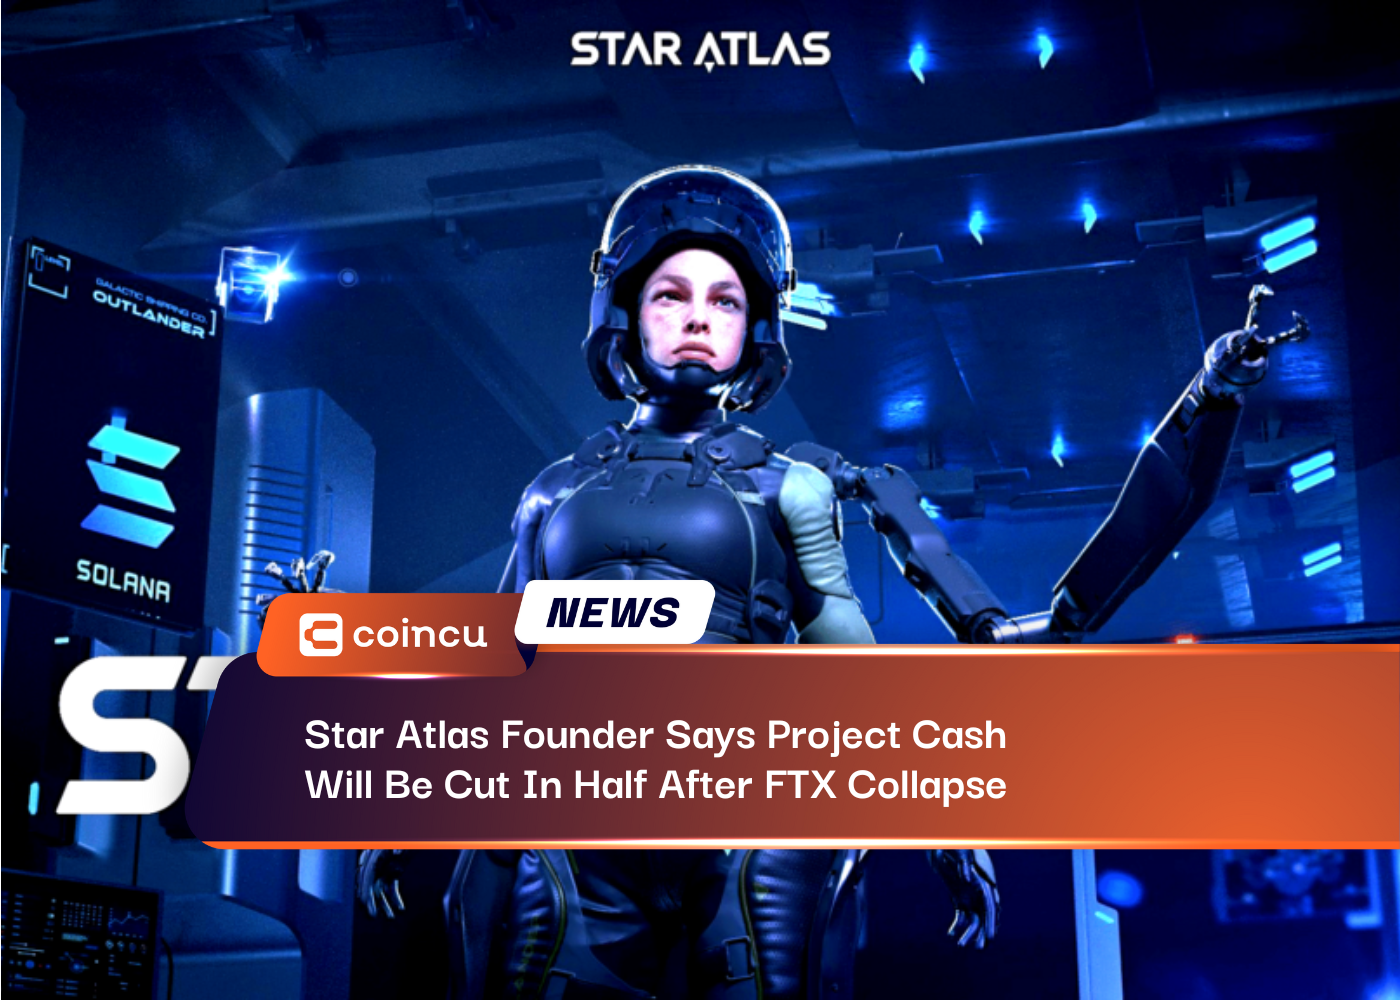 Star Atlas Founder Says Project Cash Will Be Cut In Half After FTX Collapse